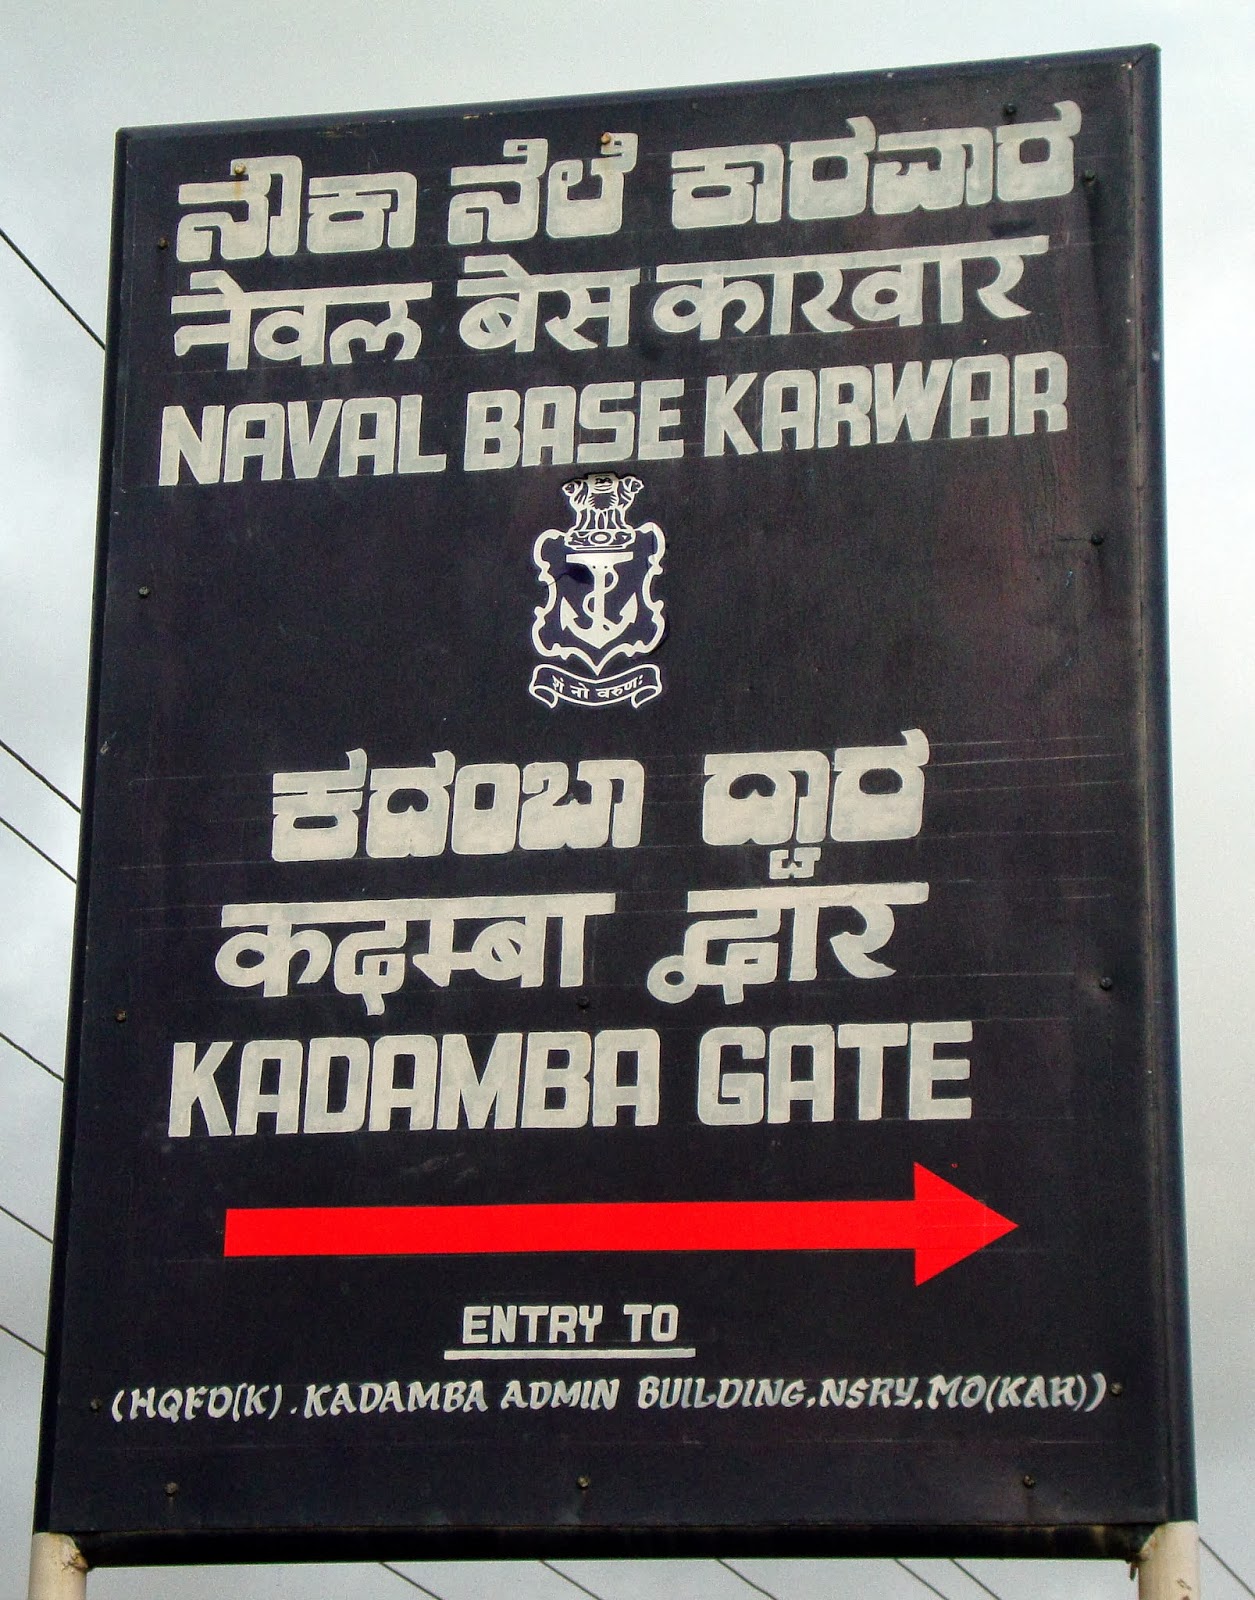 ... Based at Karwar, Karwar Likely To Become Indian Navy's 3rd Op Command